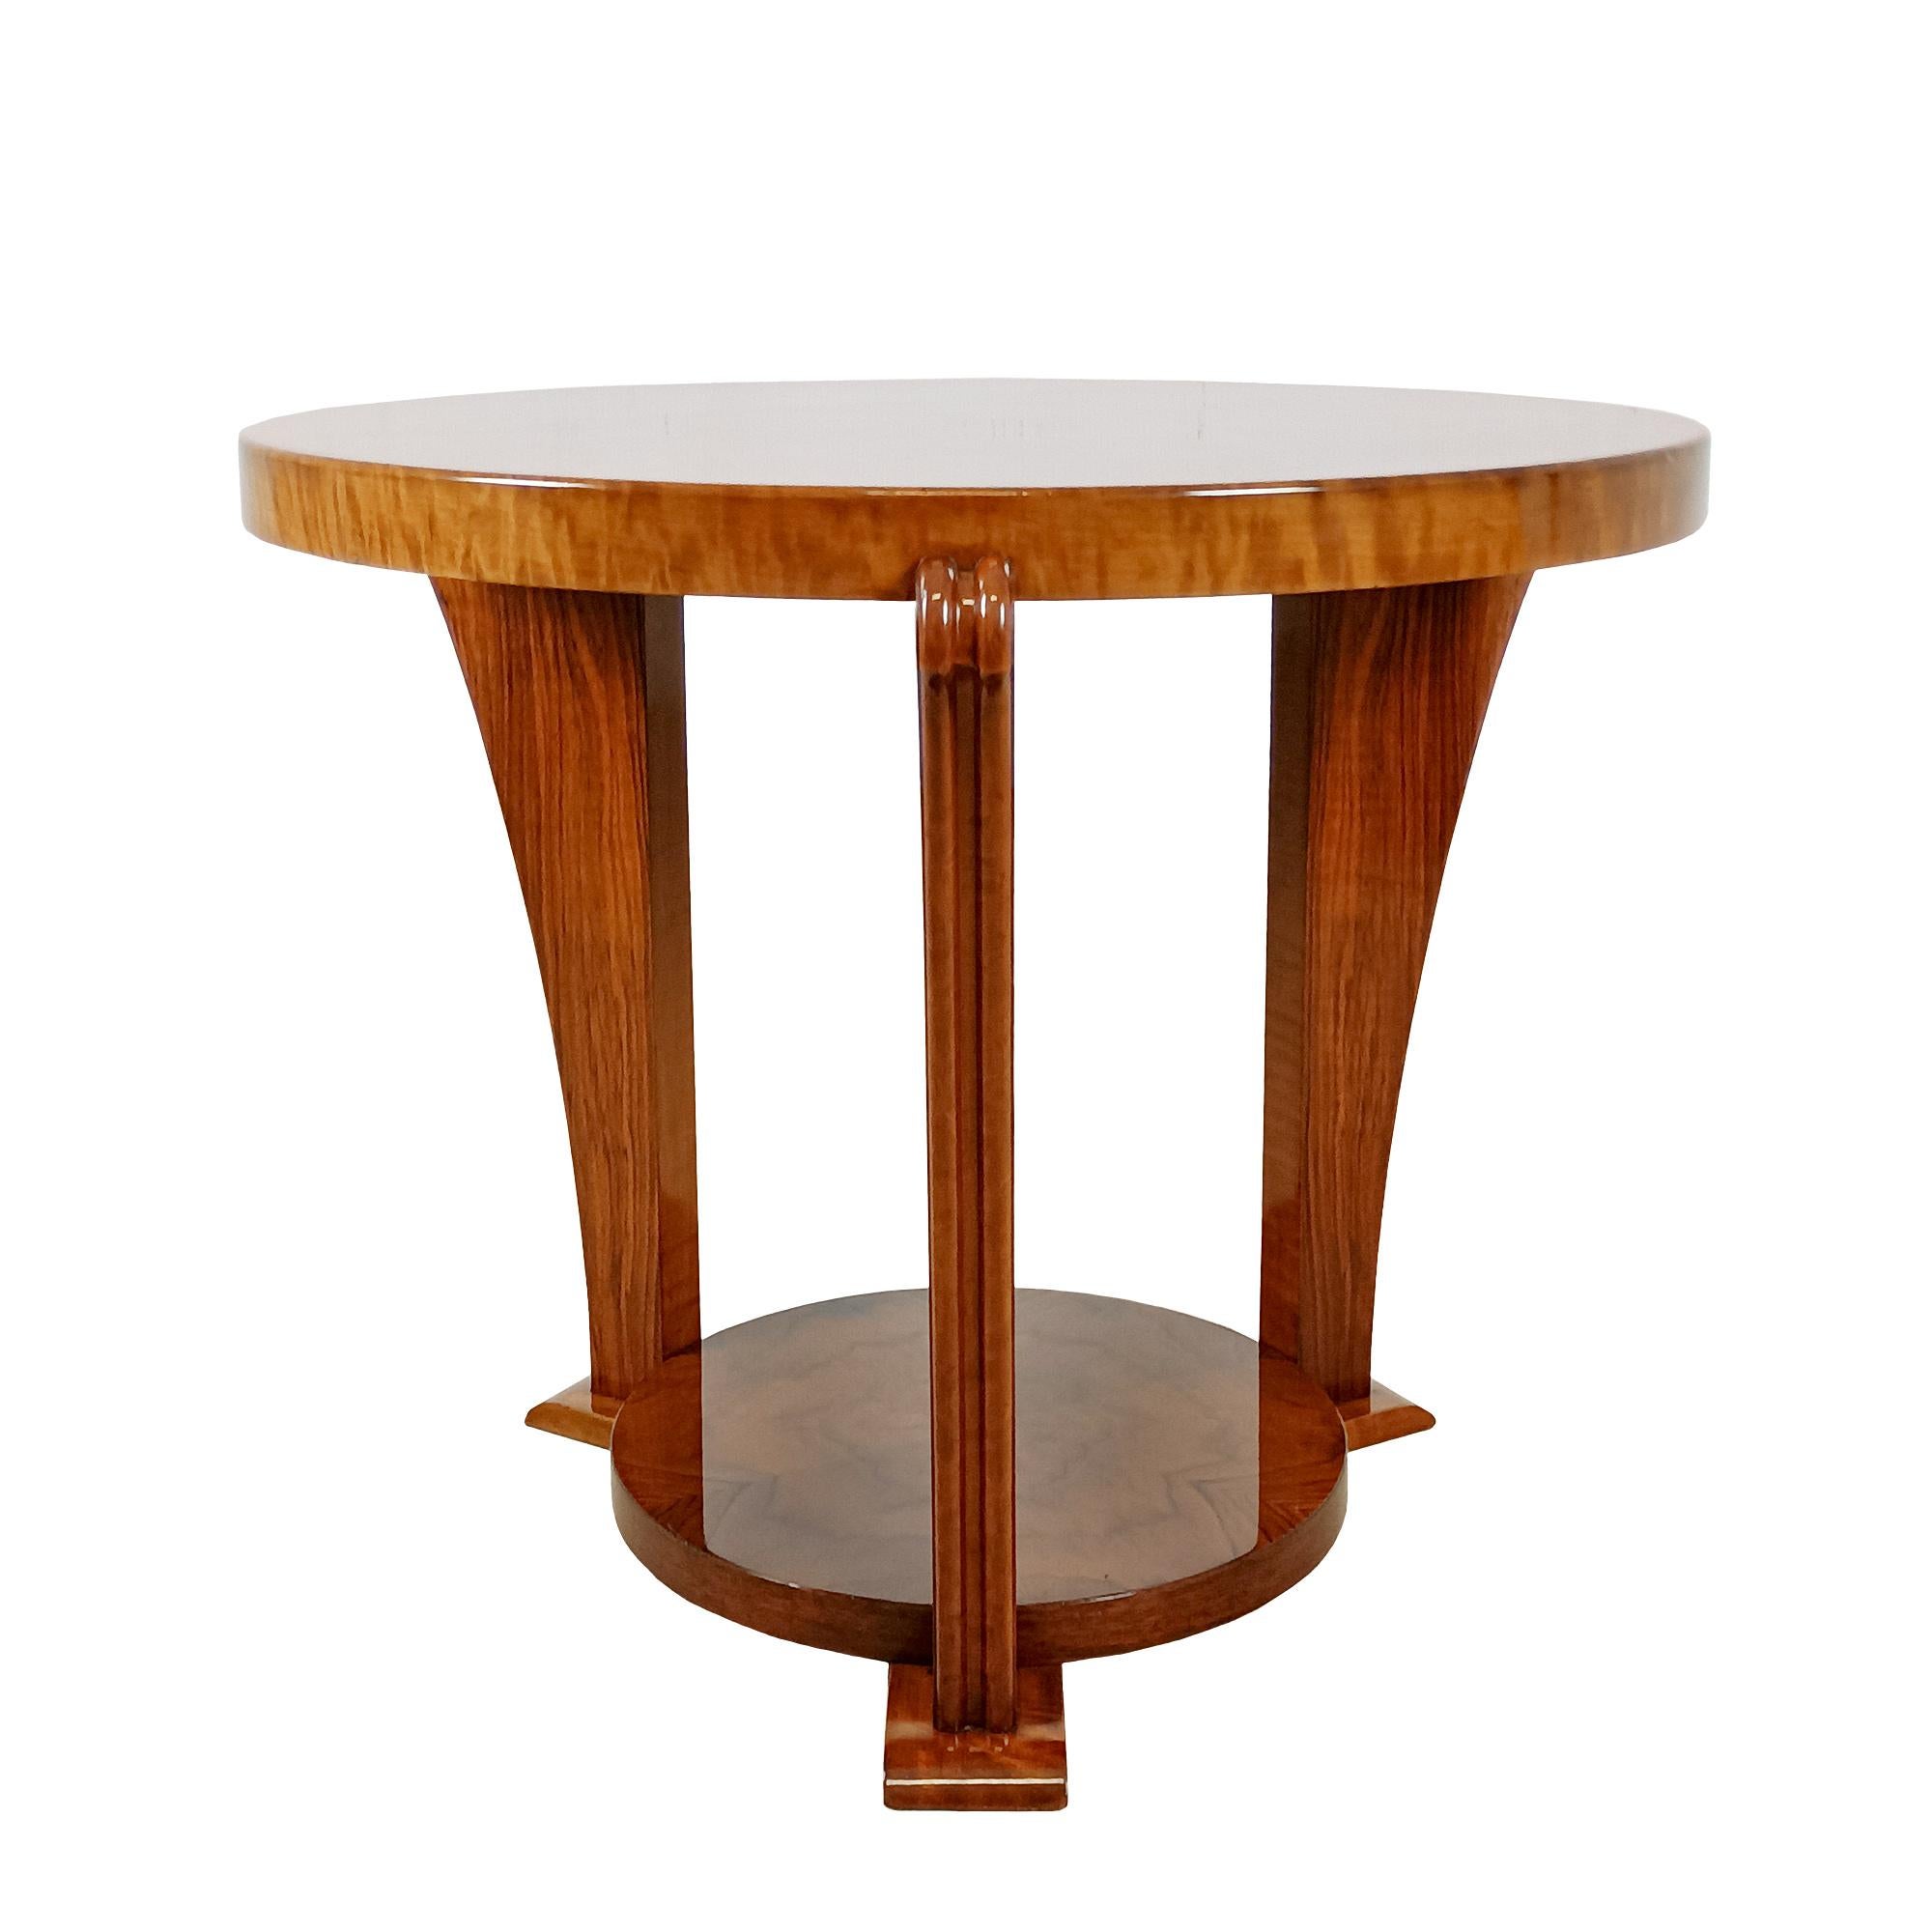 French Art Deco Side Table In Solid Walnut – France 1930 For Sale